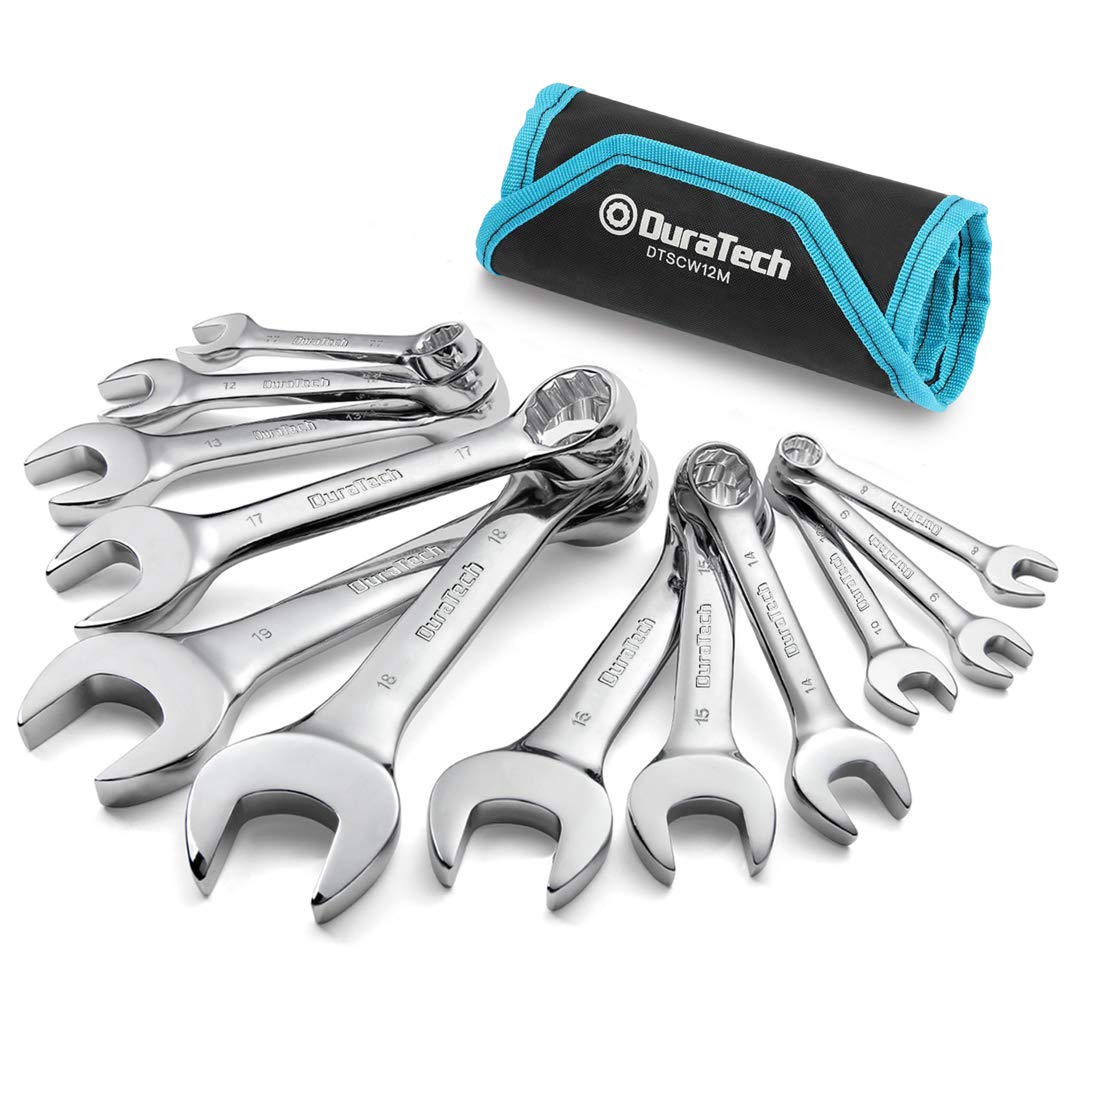 Duratech Stubby Combination Wrench Set, Metric, 12-Piece, 8-19Mm, 12 Point, Cr-V Steel, With Rolling Pouch